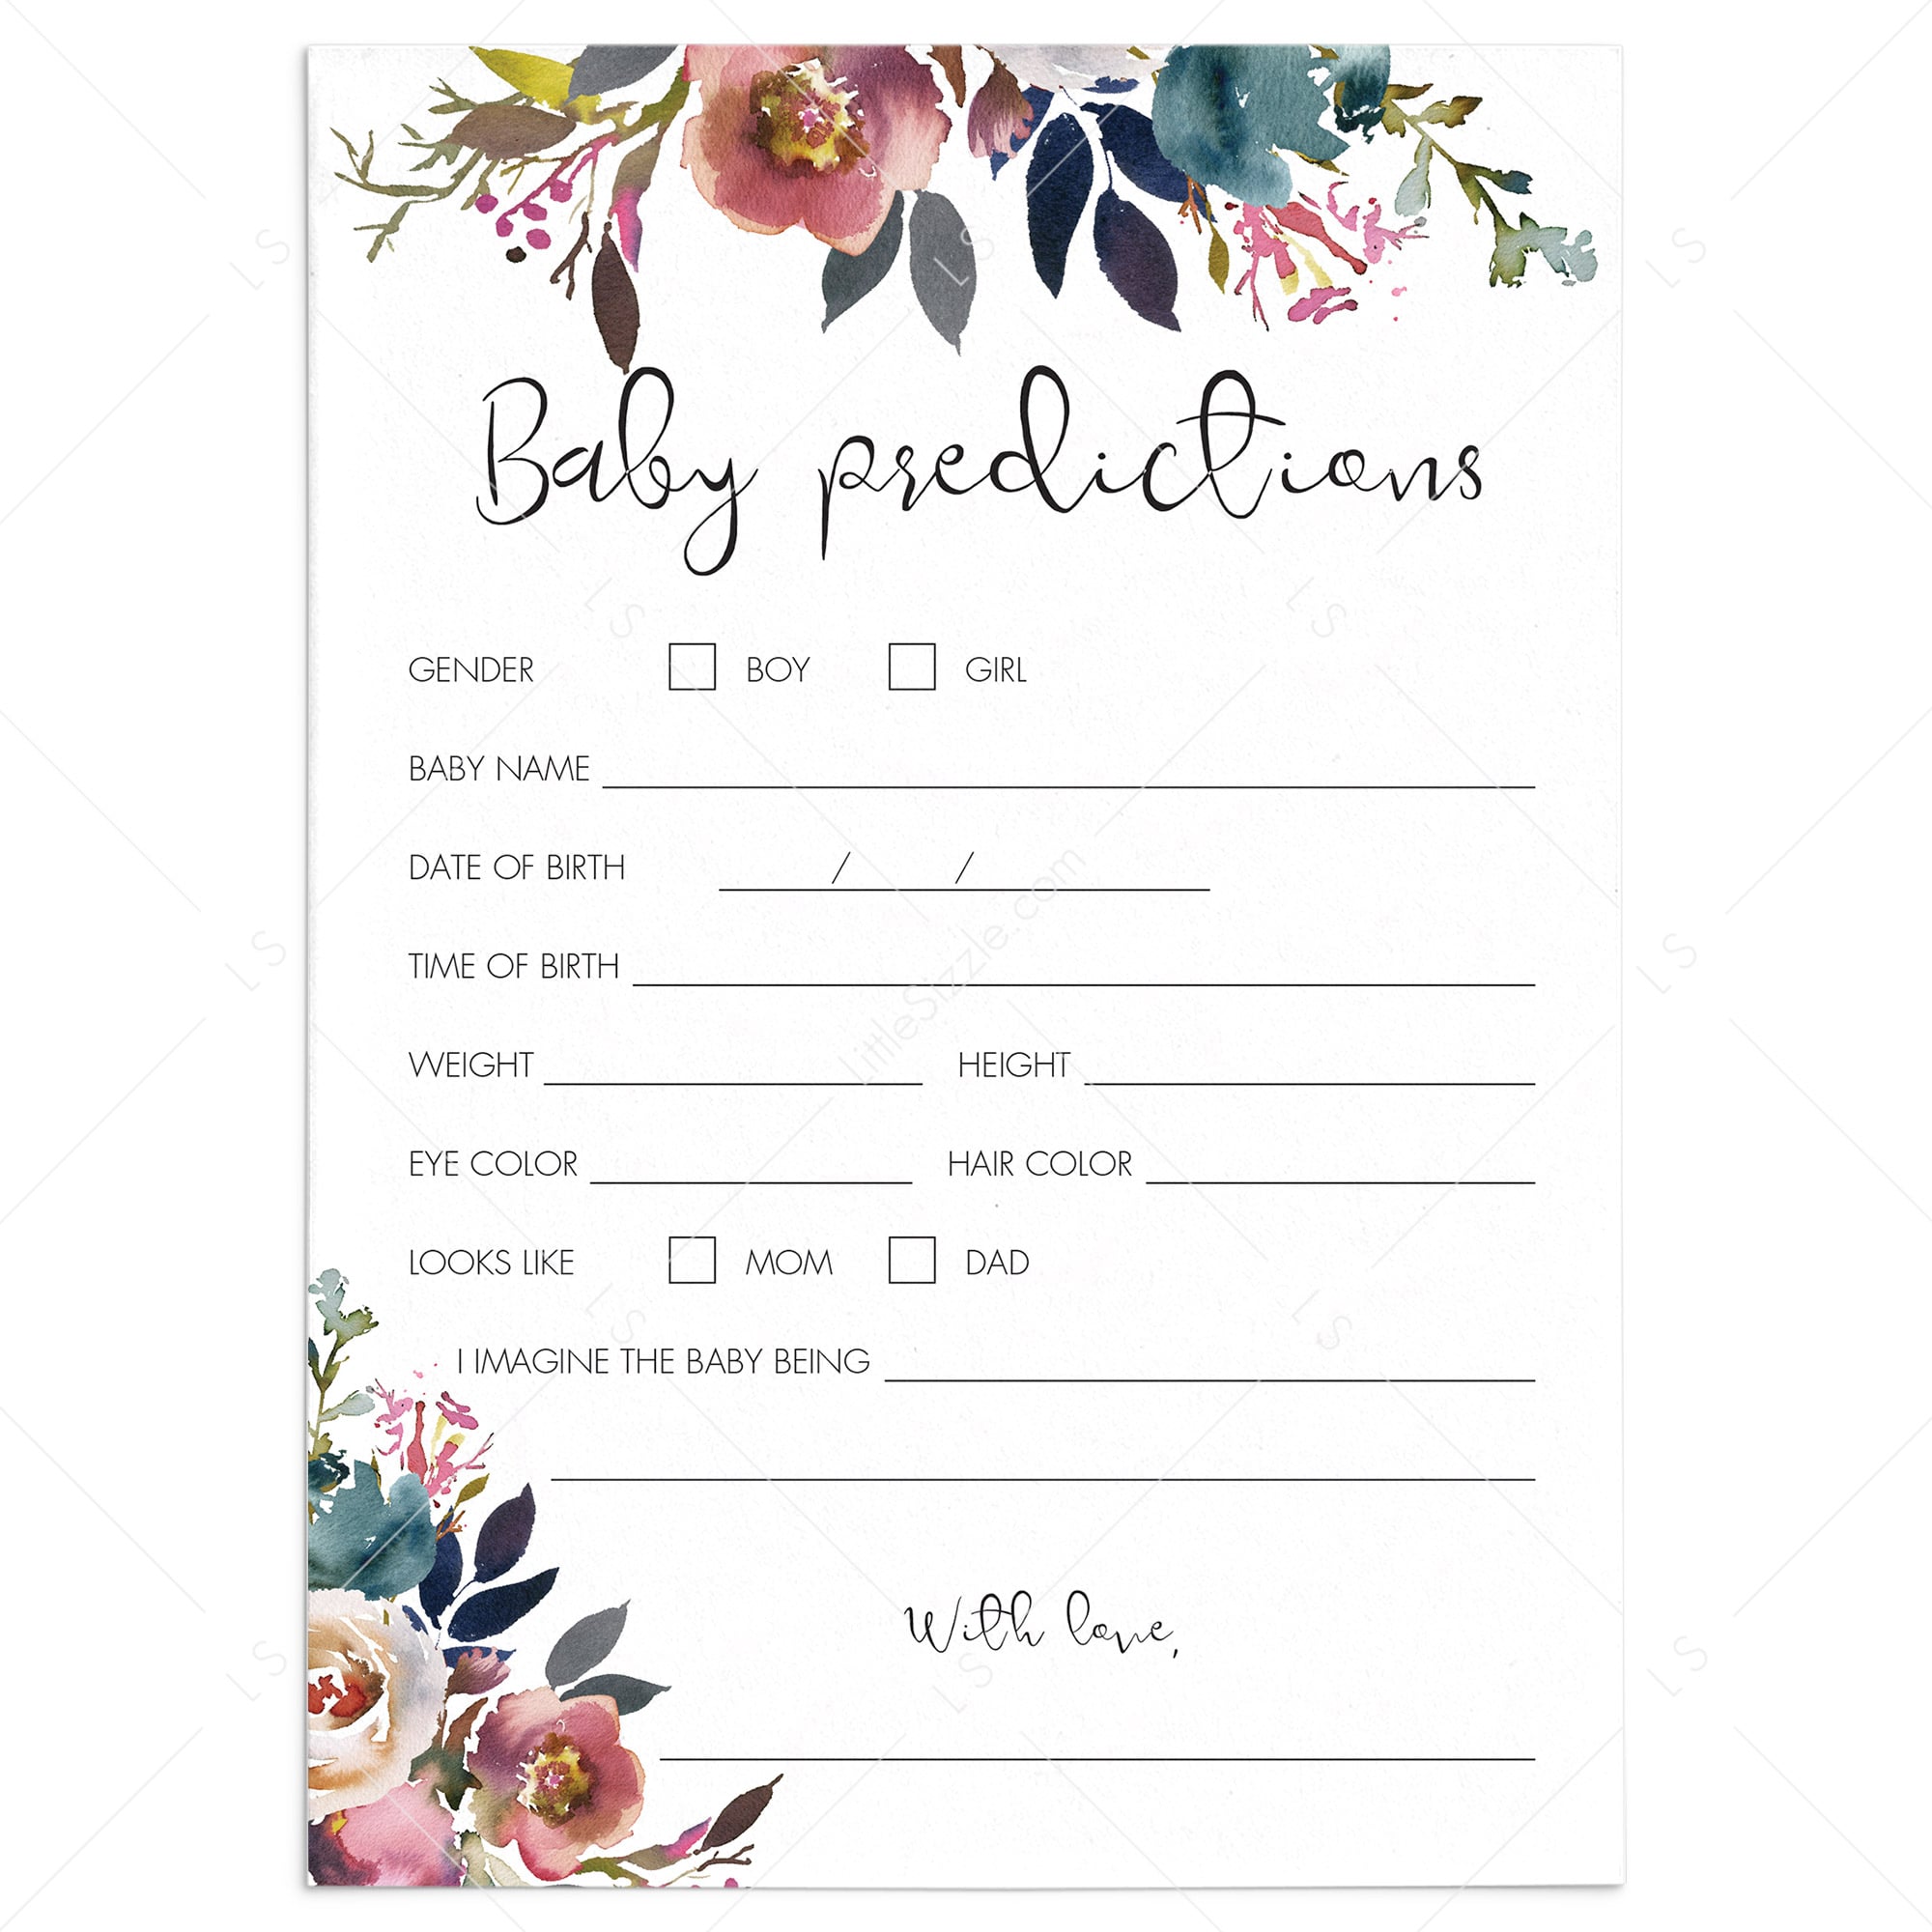 Floral watercolor baby predictions game printable by LittleSizzle